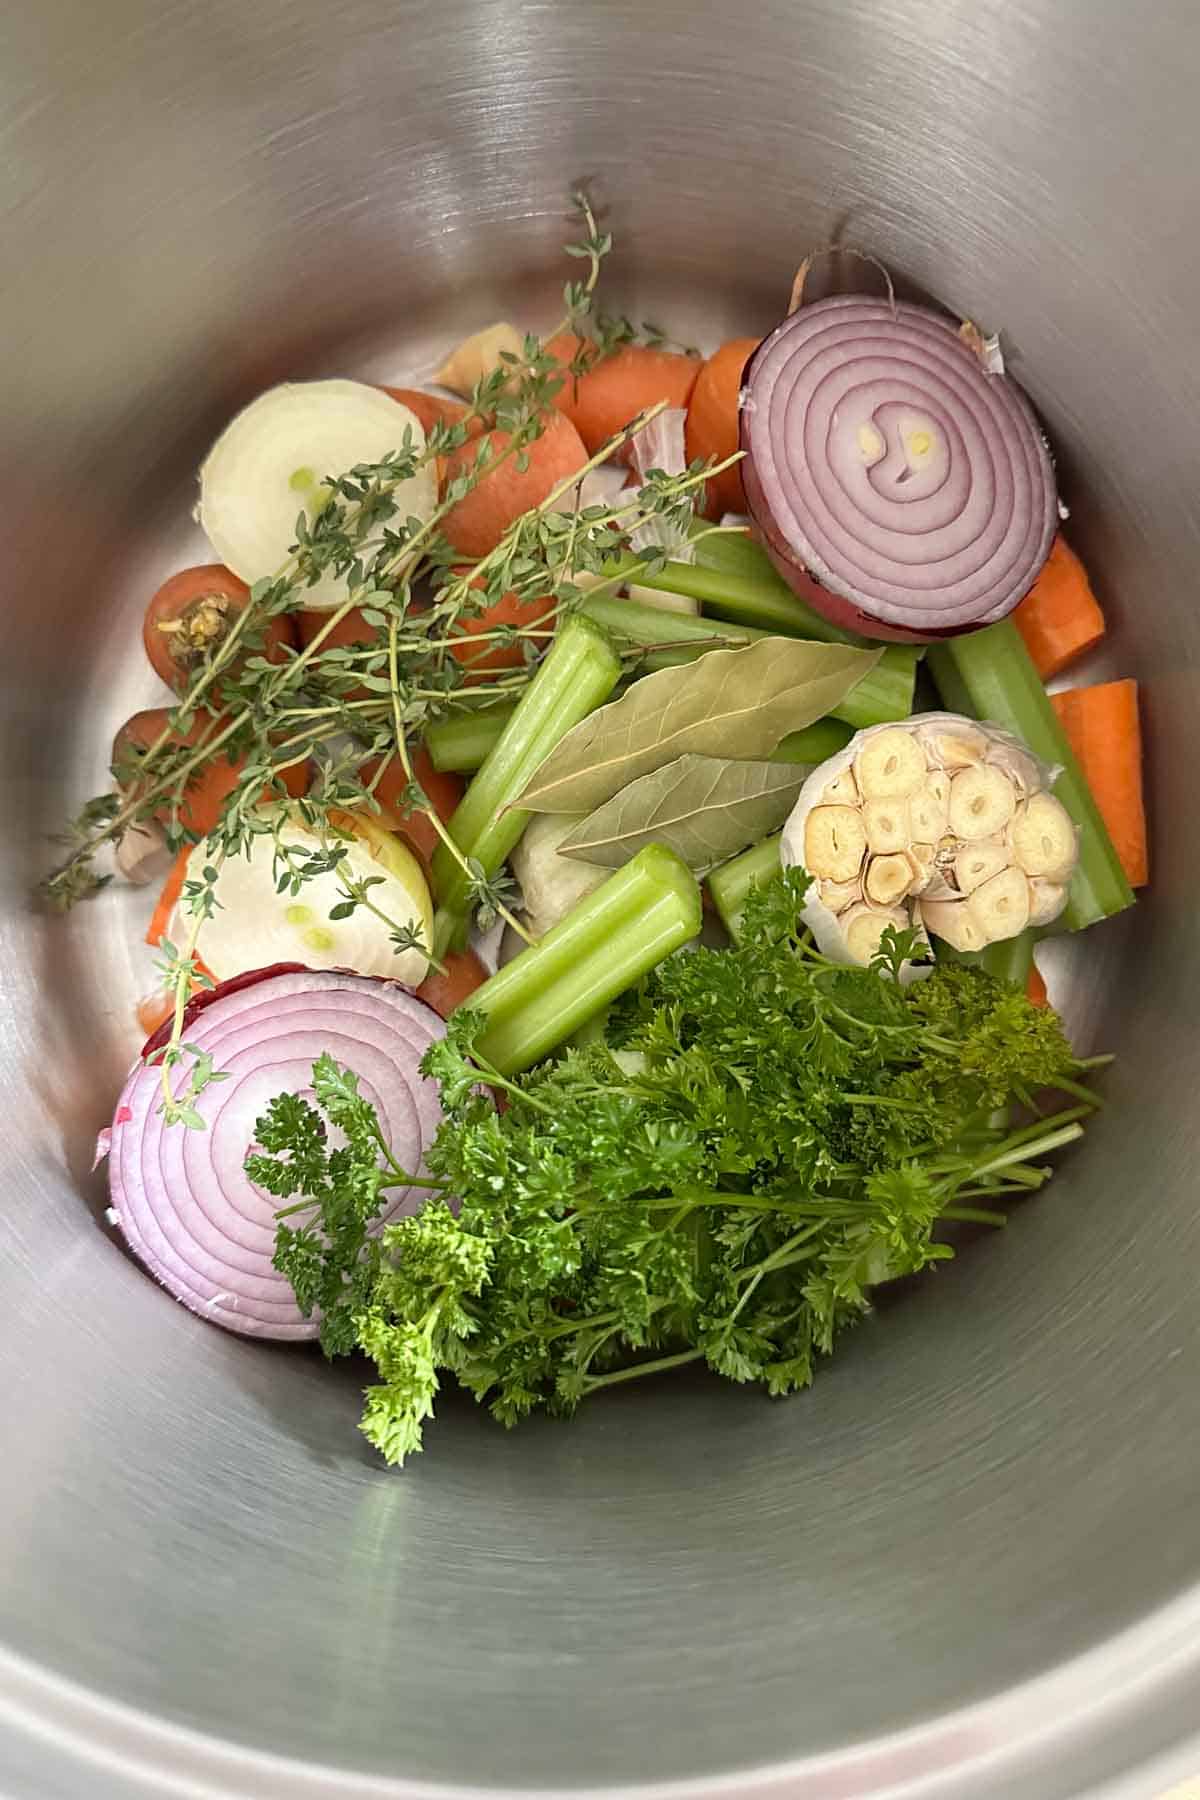 Pot filled with vegetables and herbs to make homemade vegetable stock.